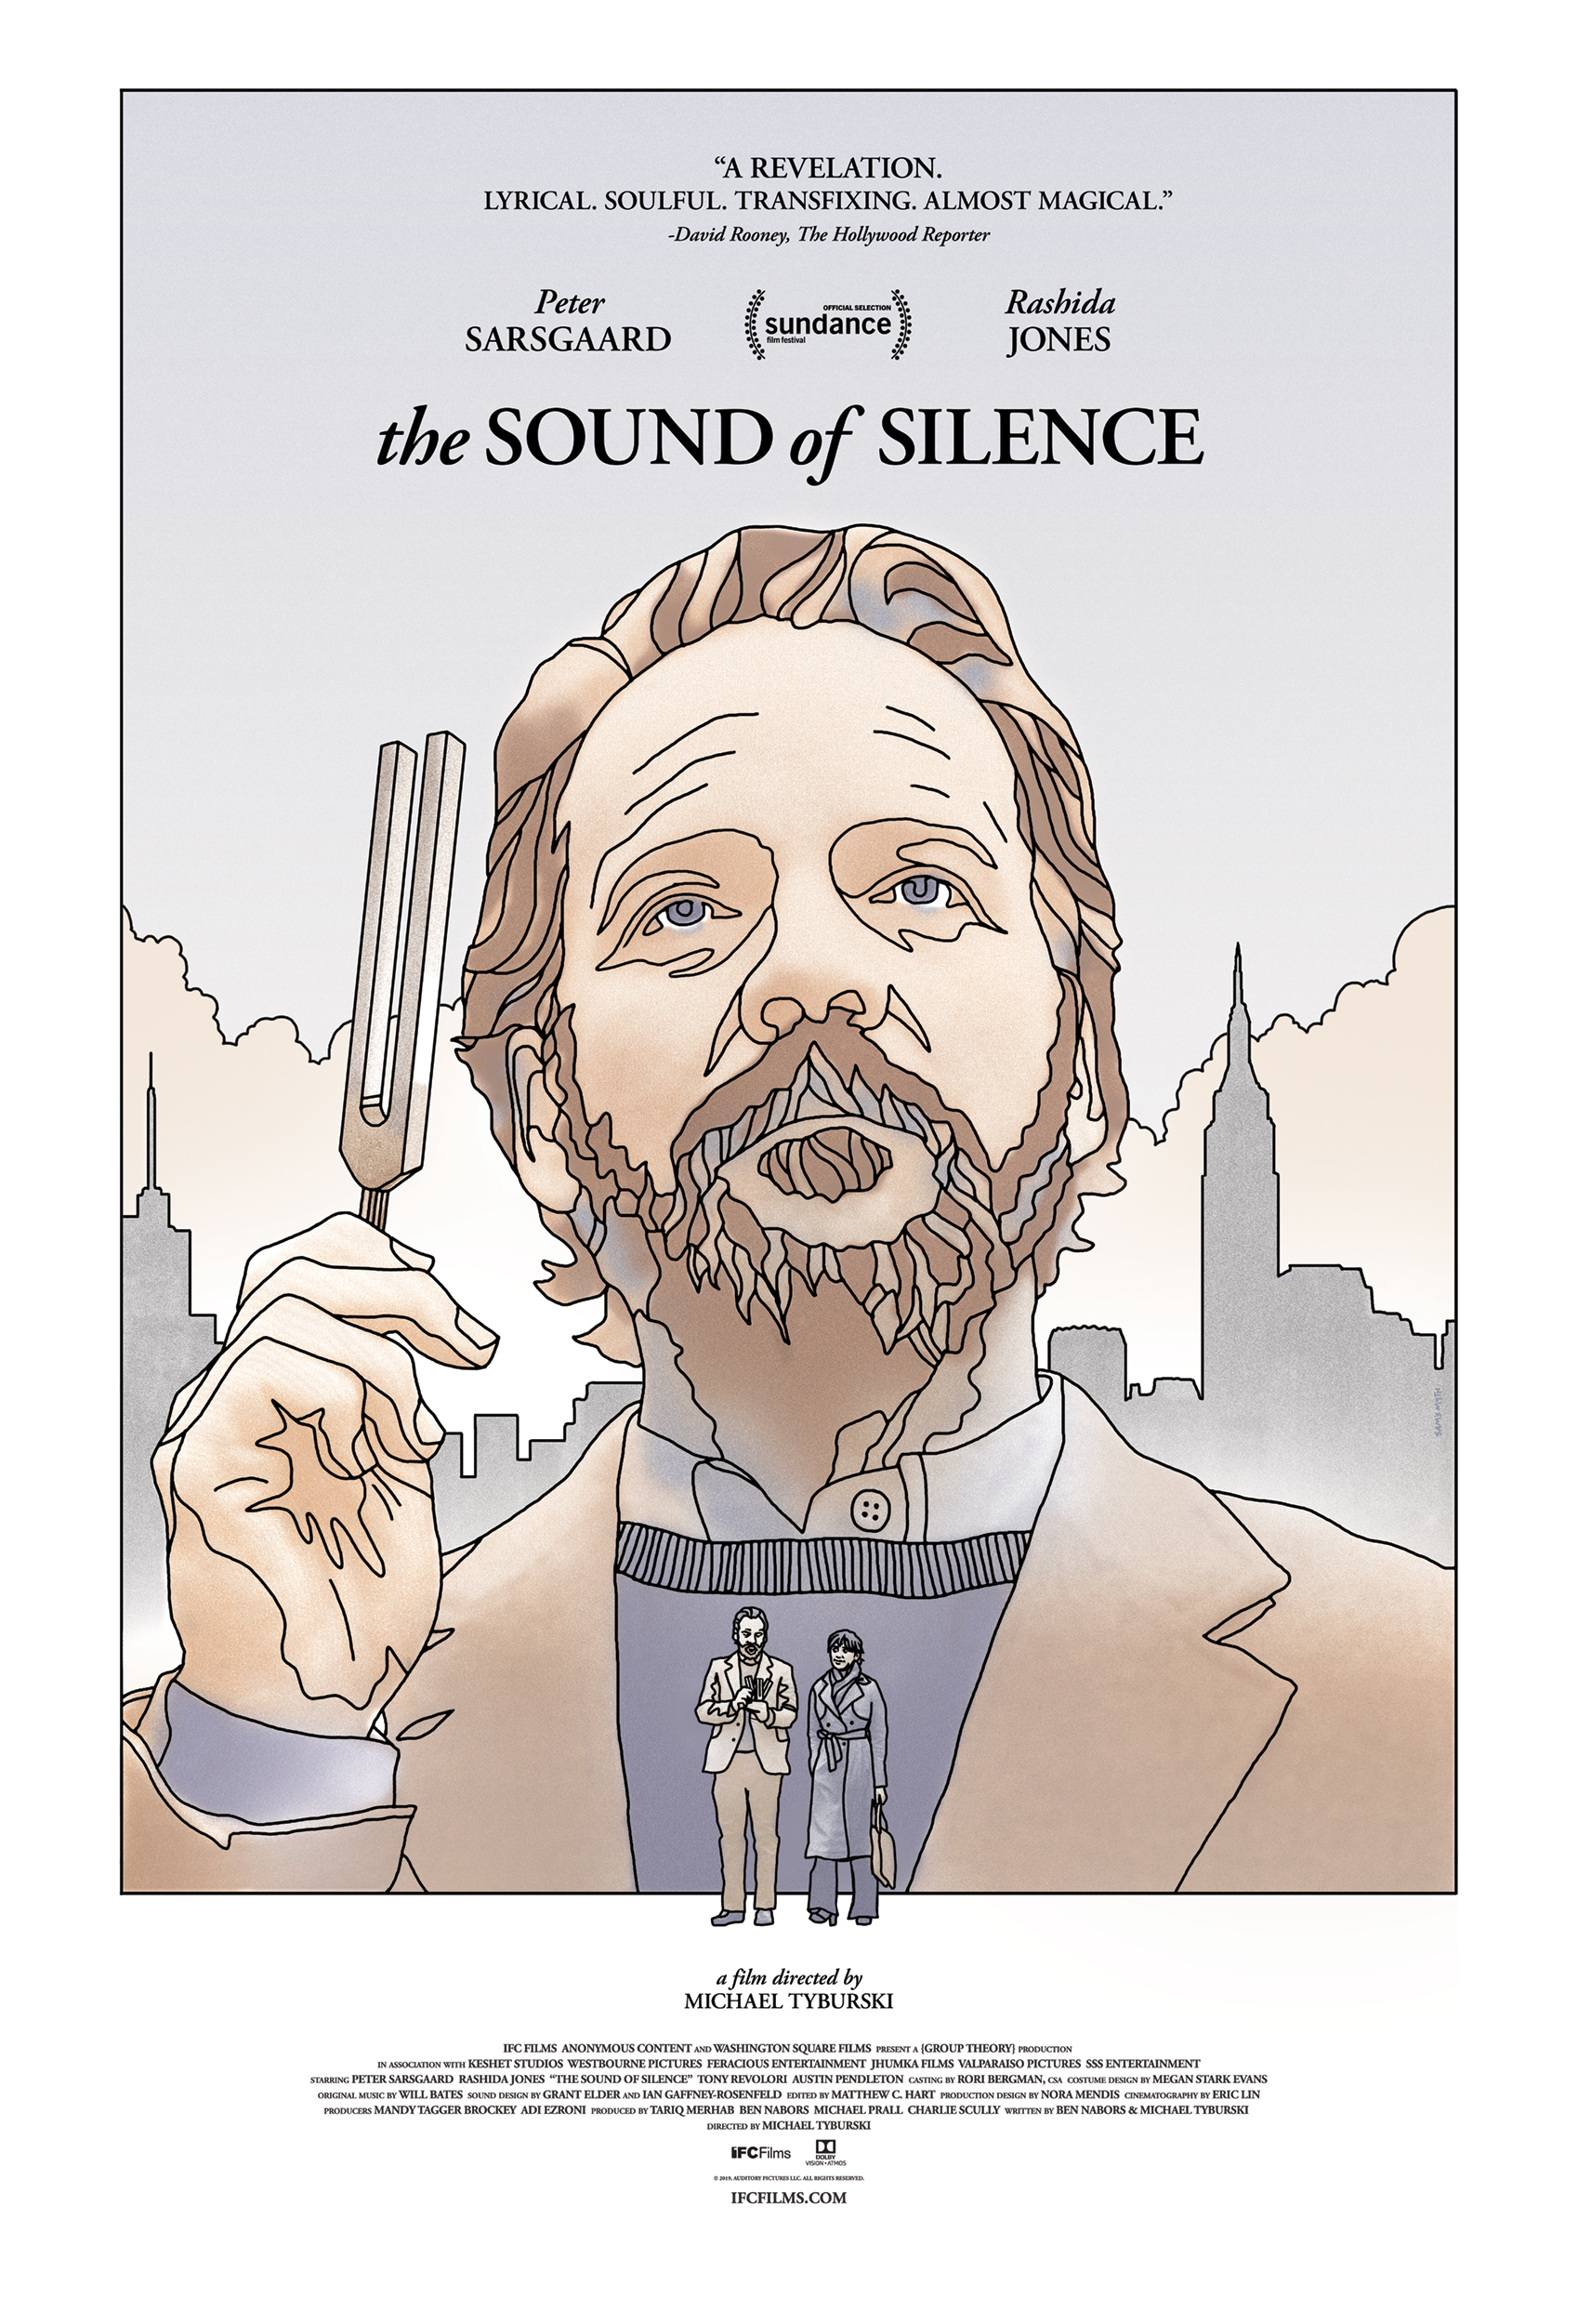 The Sound of Silence (2019) Peter Sarsgaard